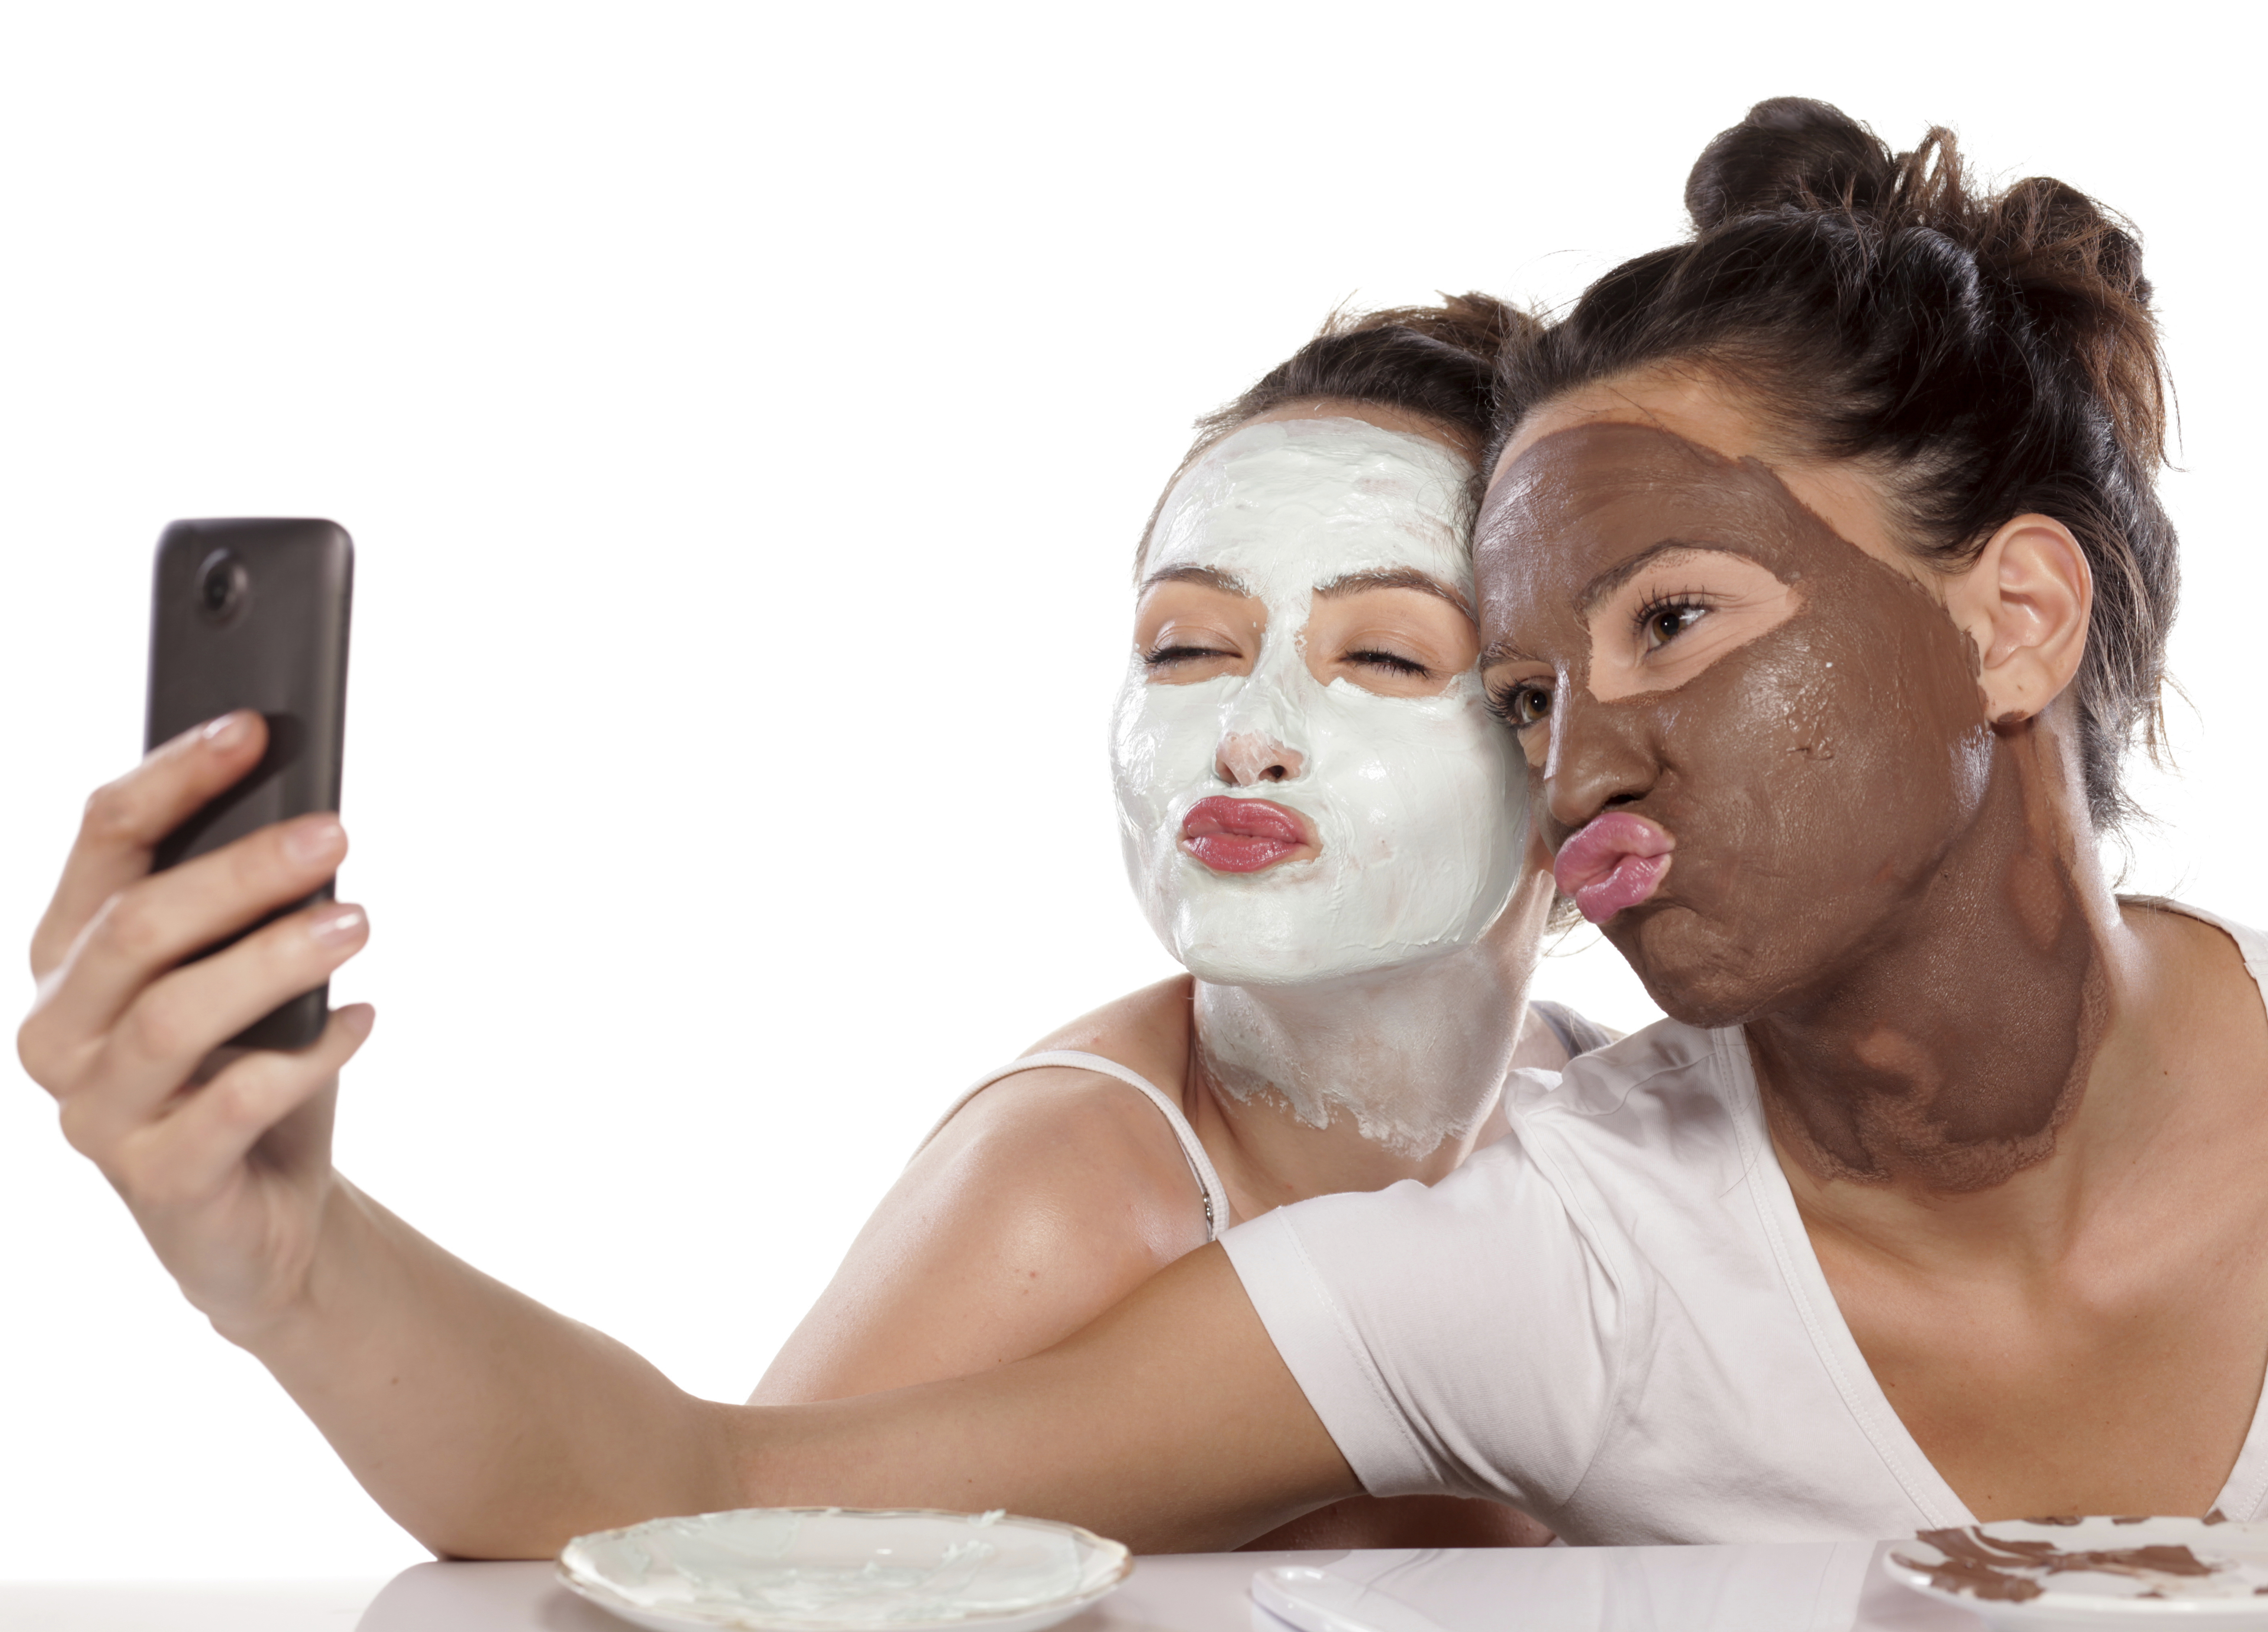 #InstaSpa: Online beauty trends shake up the at-home spa market